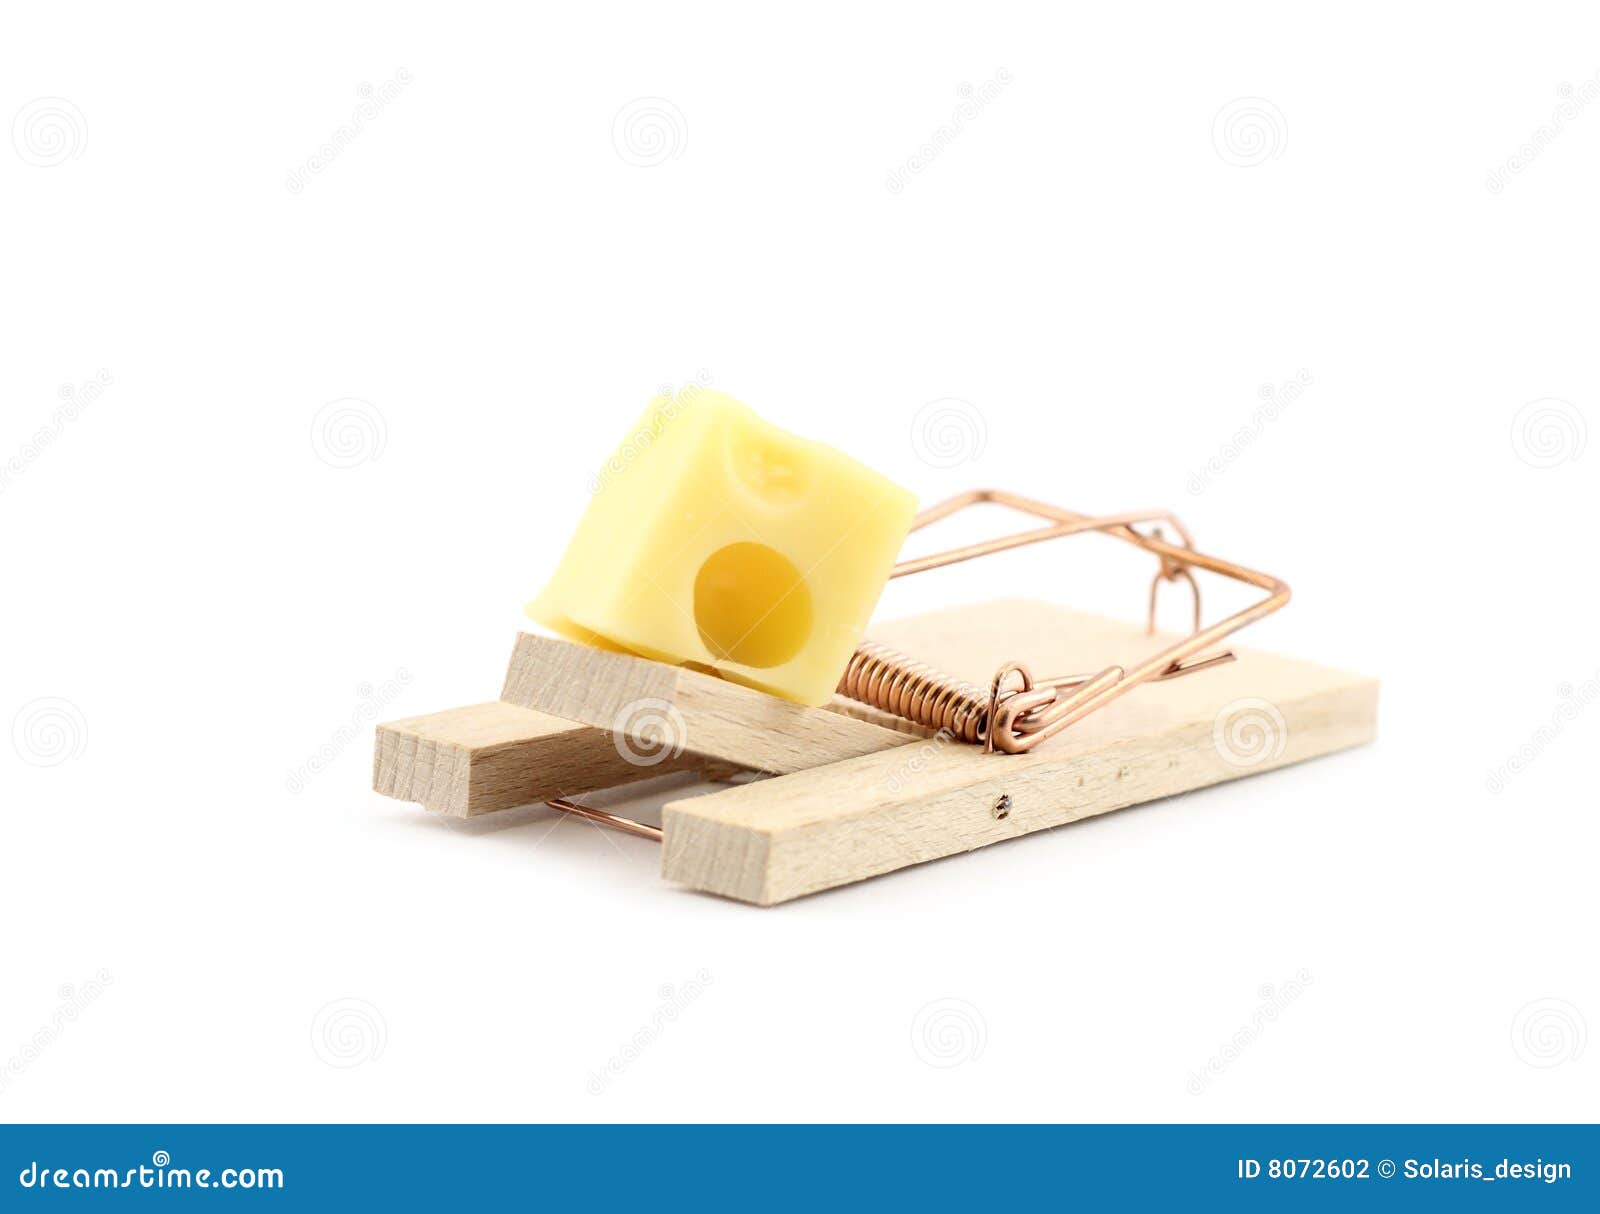 mouse trap with cheese 